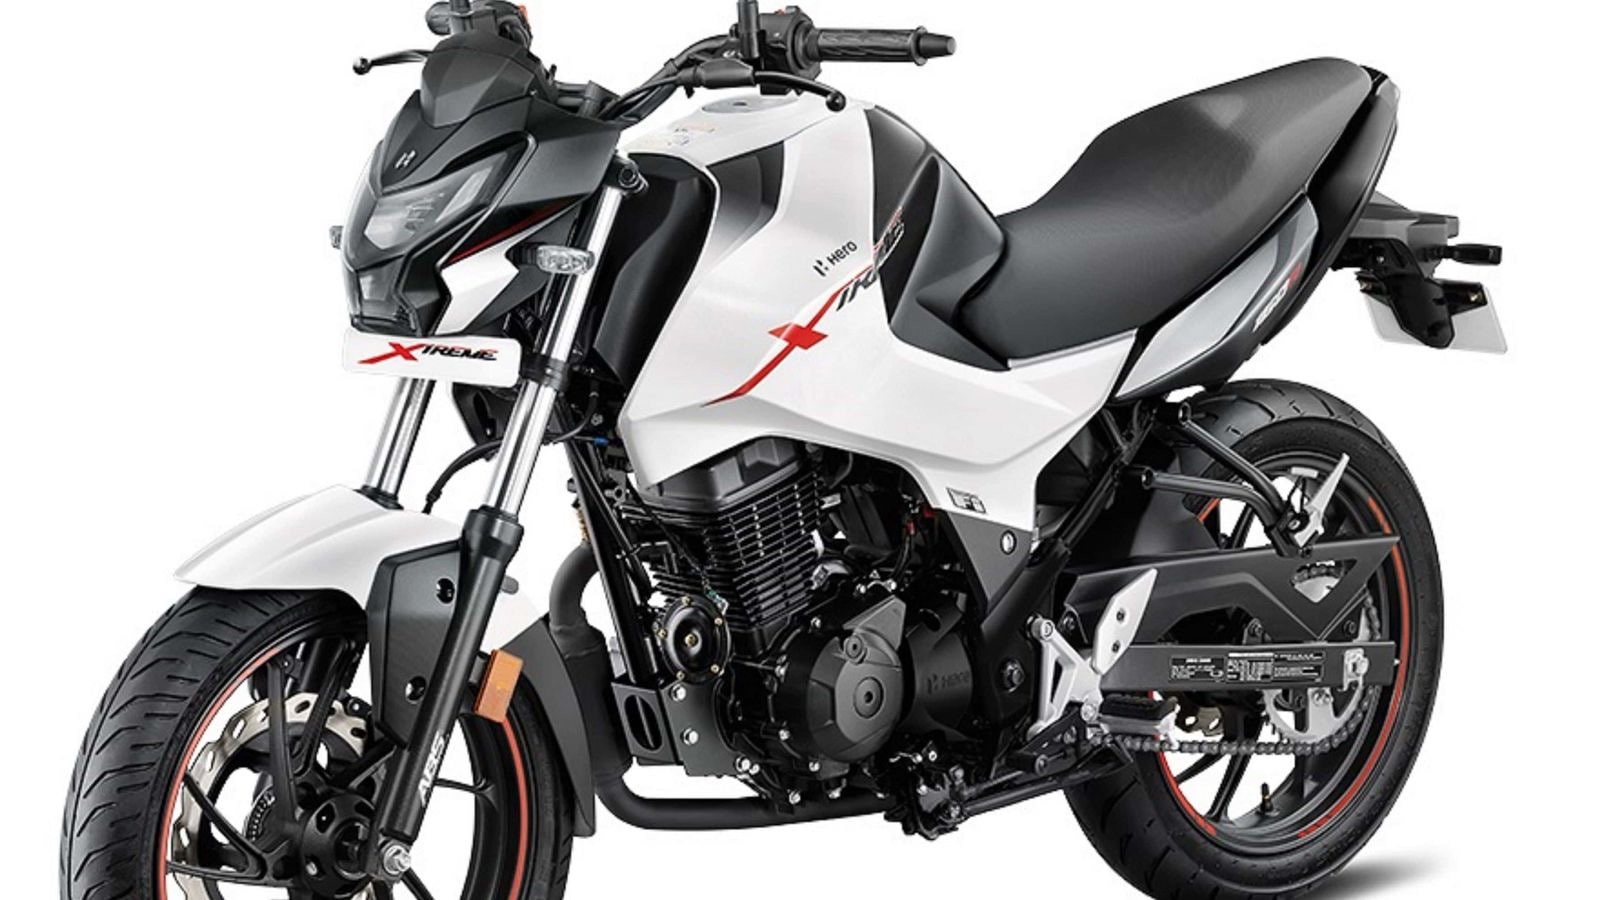 Hero Xtreme 1.R Concept Images [HD]: Photo Gallery of Hero Xtreme 1.R  Concept - DriveSpark